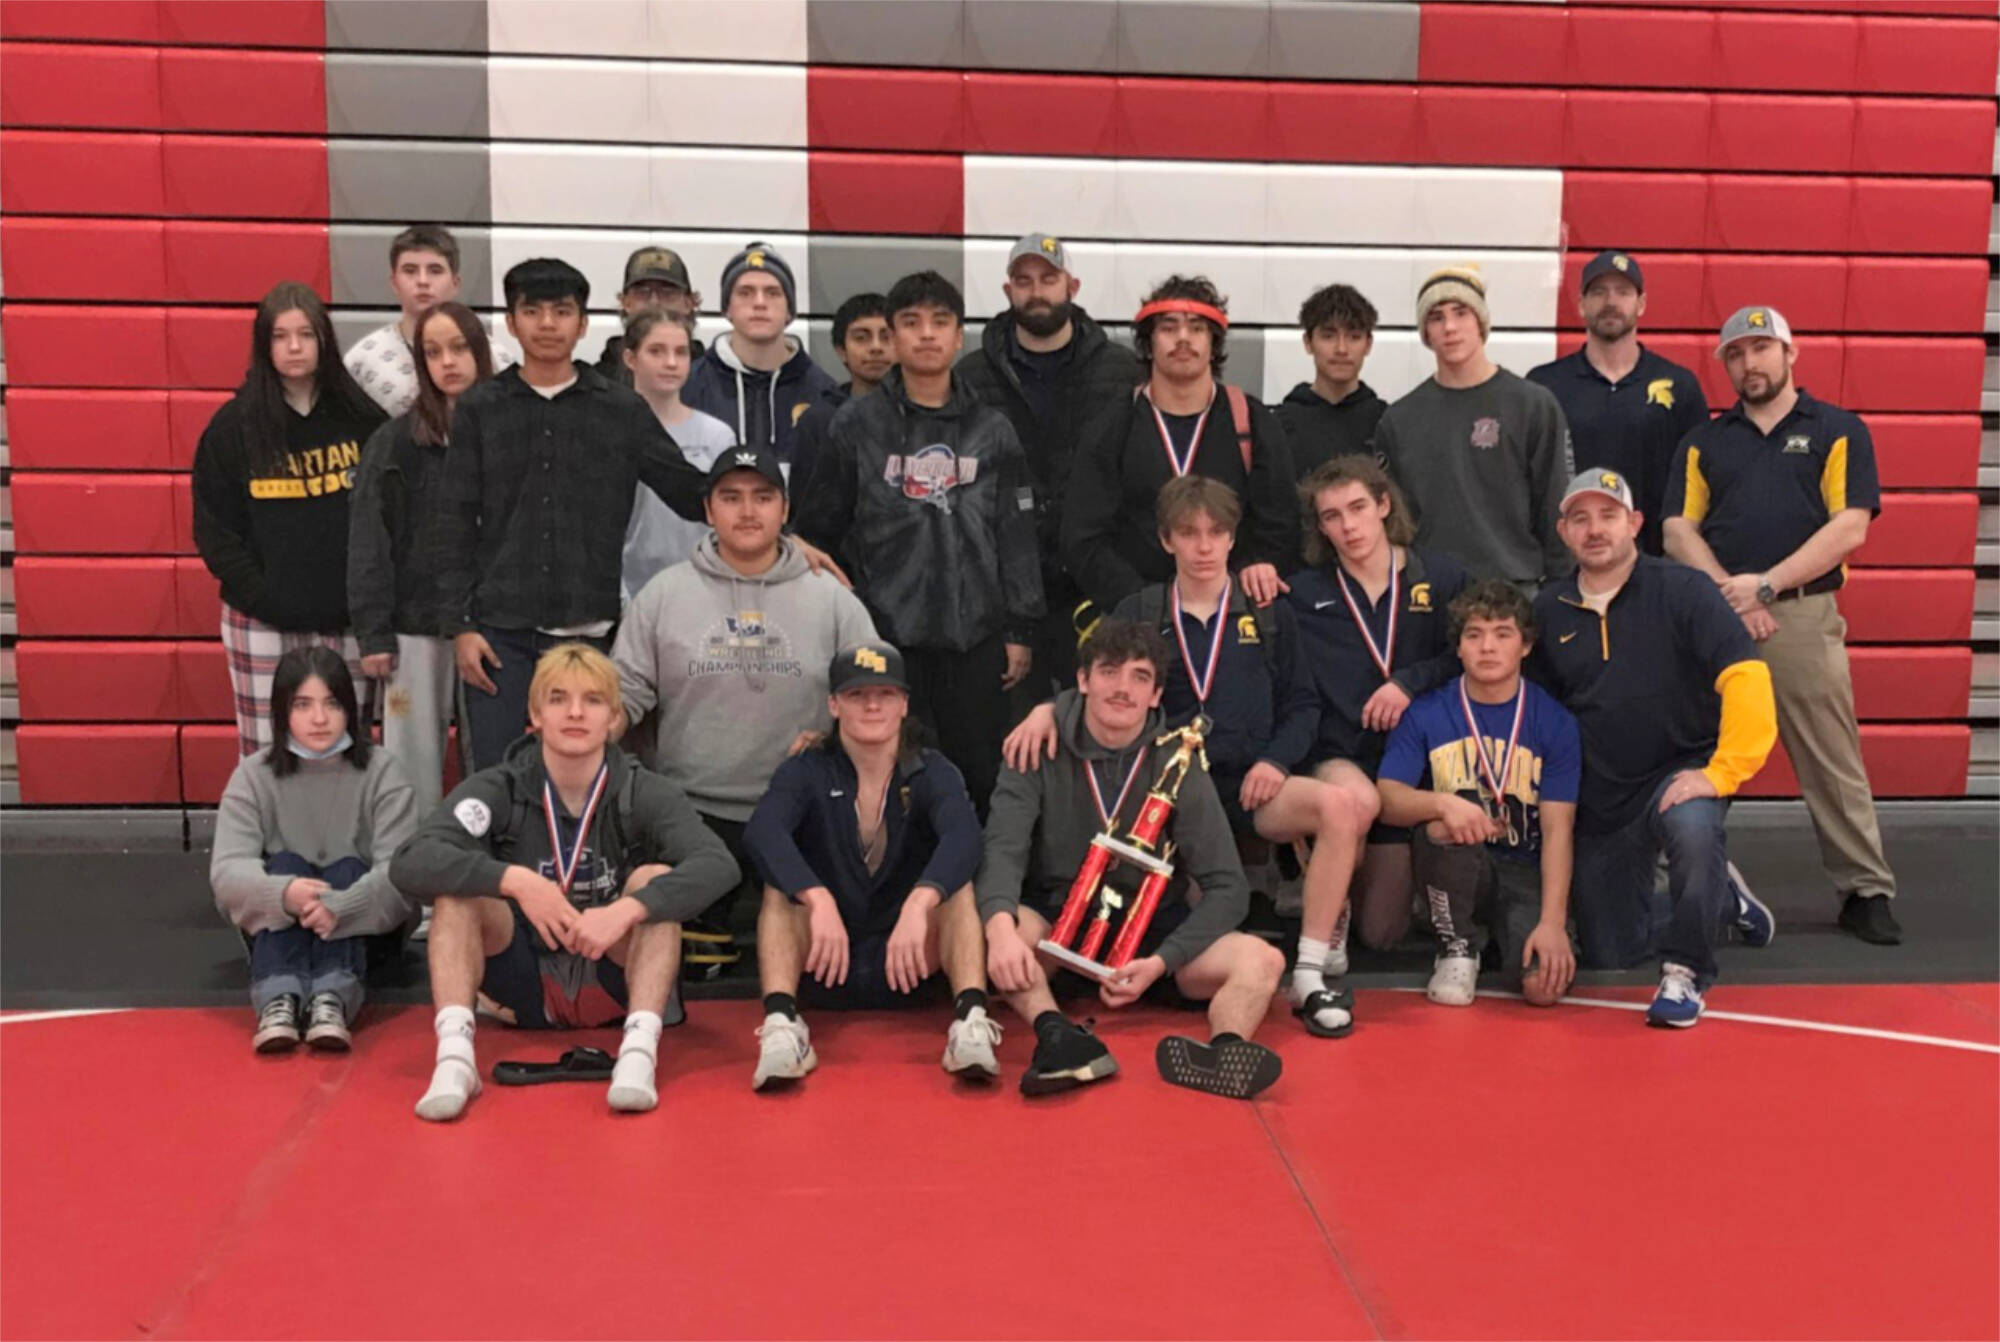 Courtesy of Forks High School
The Forks boys and girls wrestling teams celebrate their second- and fourth-place trophies at the Tony Saldiver Invitational held in Granger on Saturday.